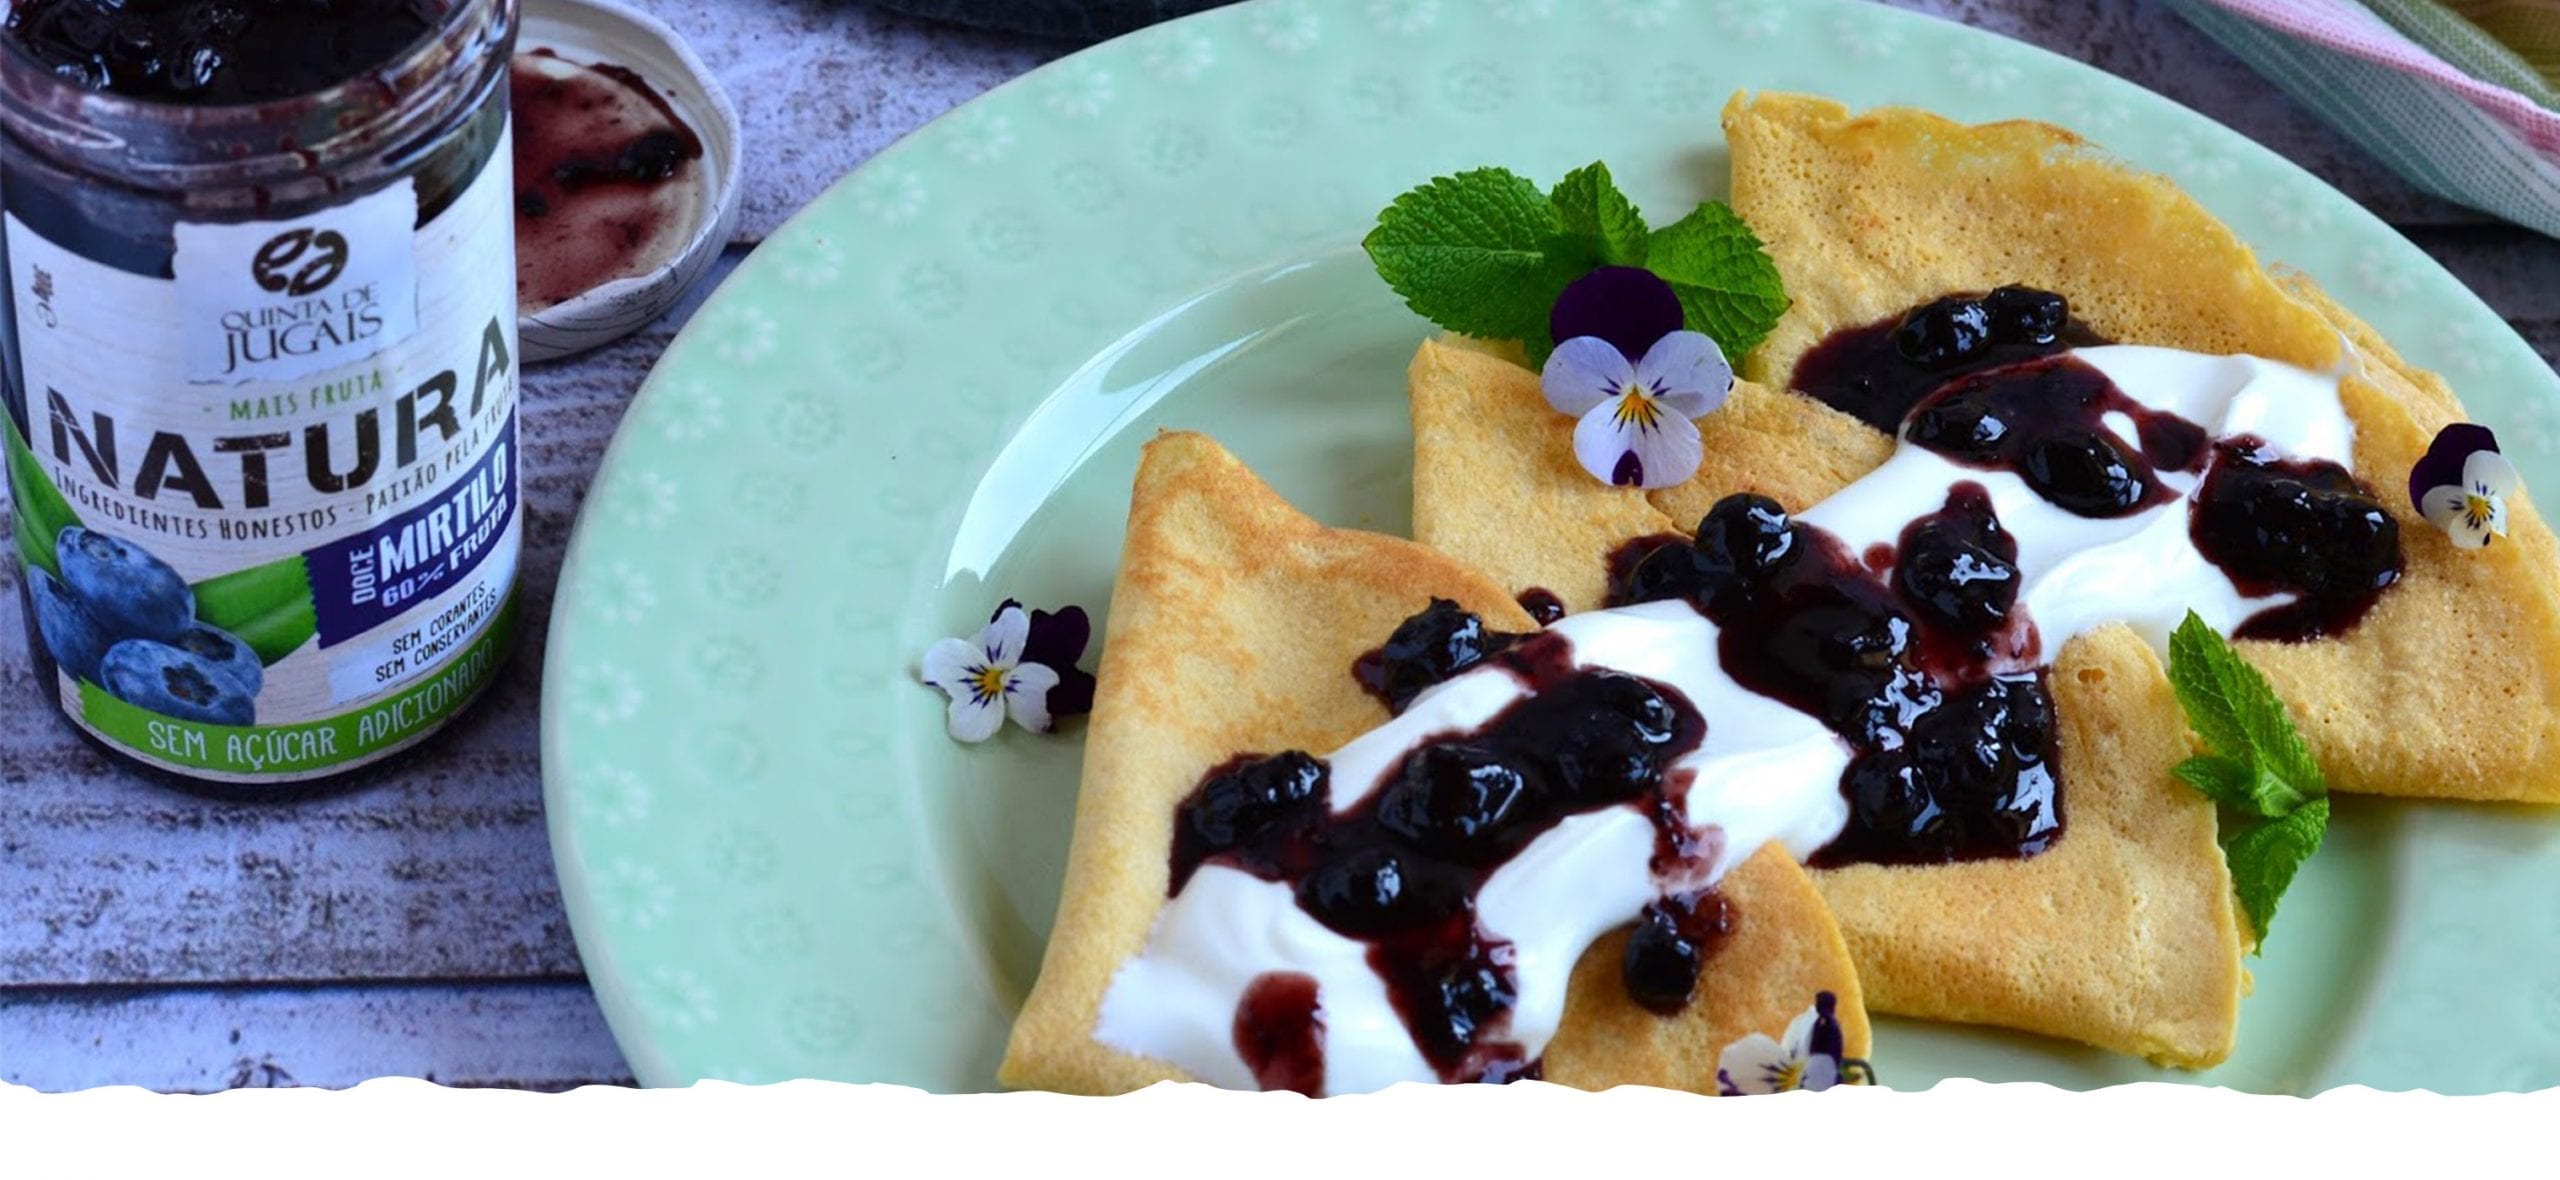 Gluten Free Crepes with Natura Blueberry Jam